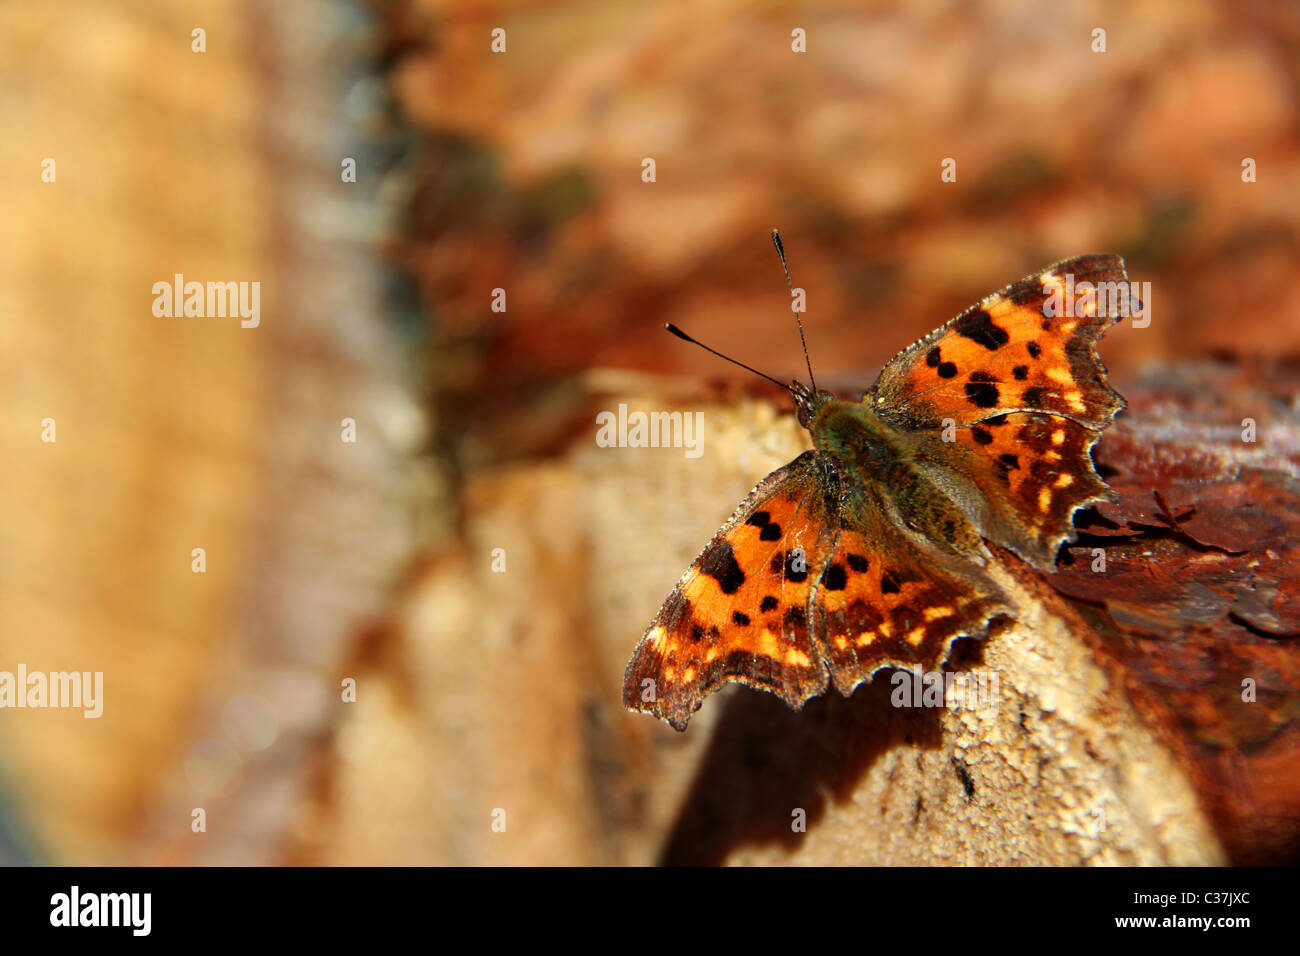 Comma Butterfly, Polygonia c-album, on Wooden Logs Banque D'Images